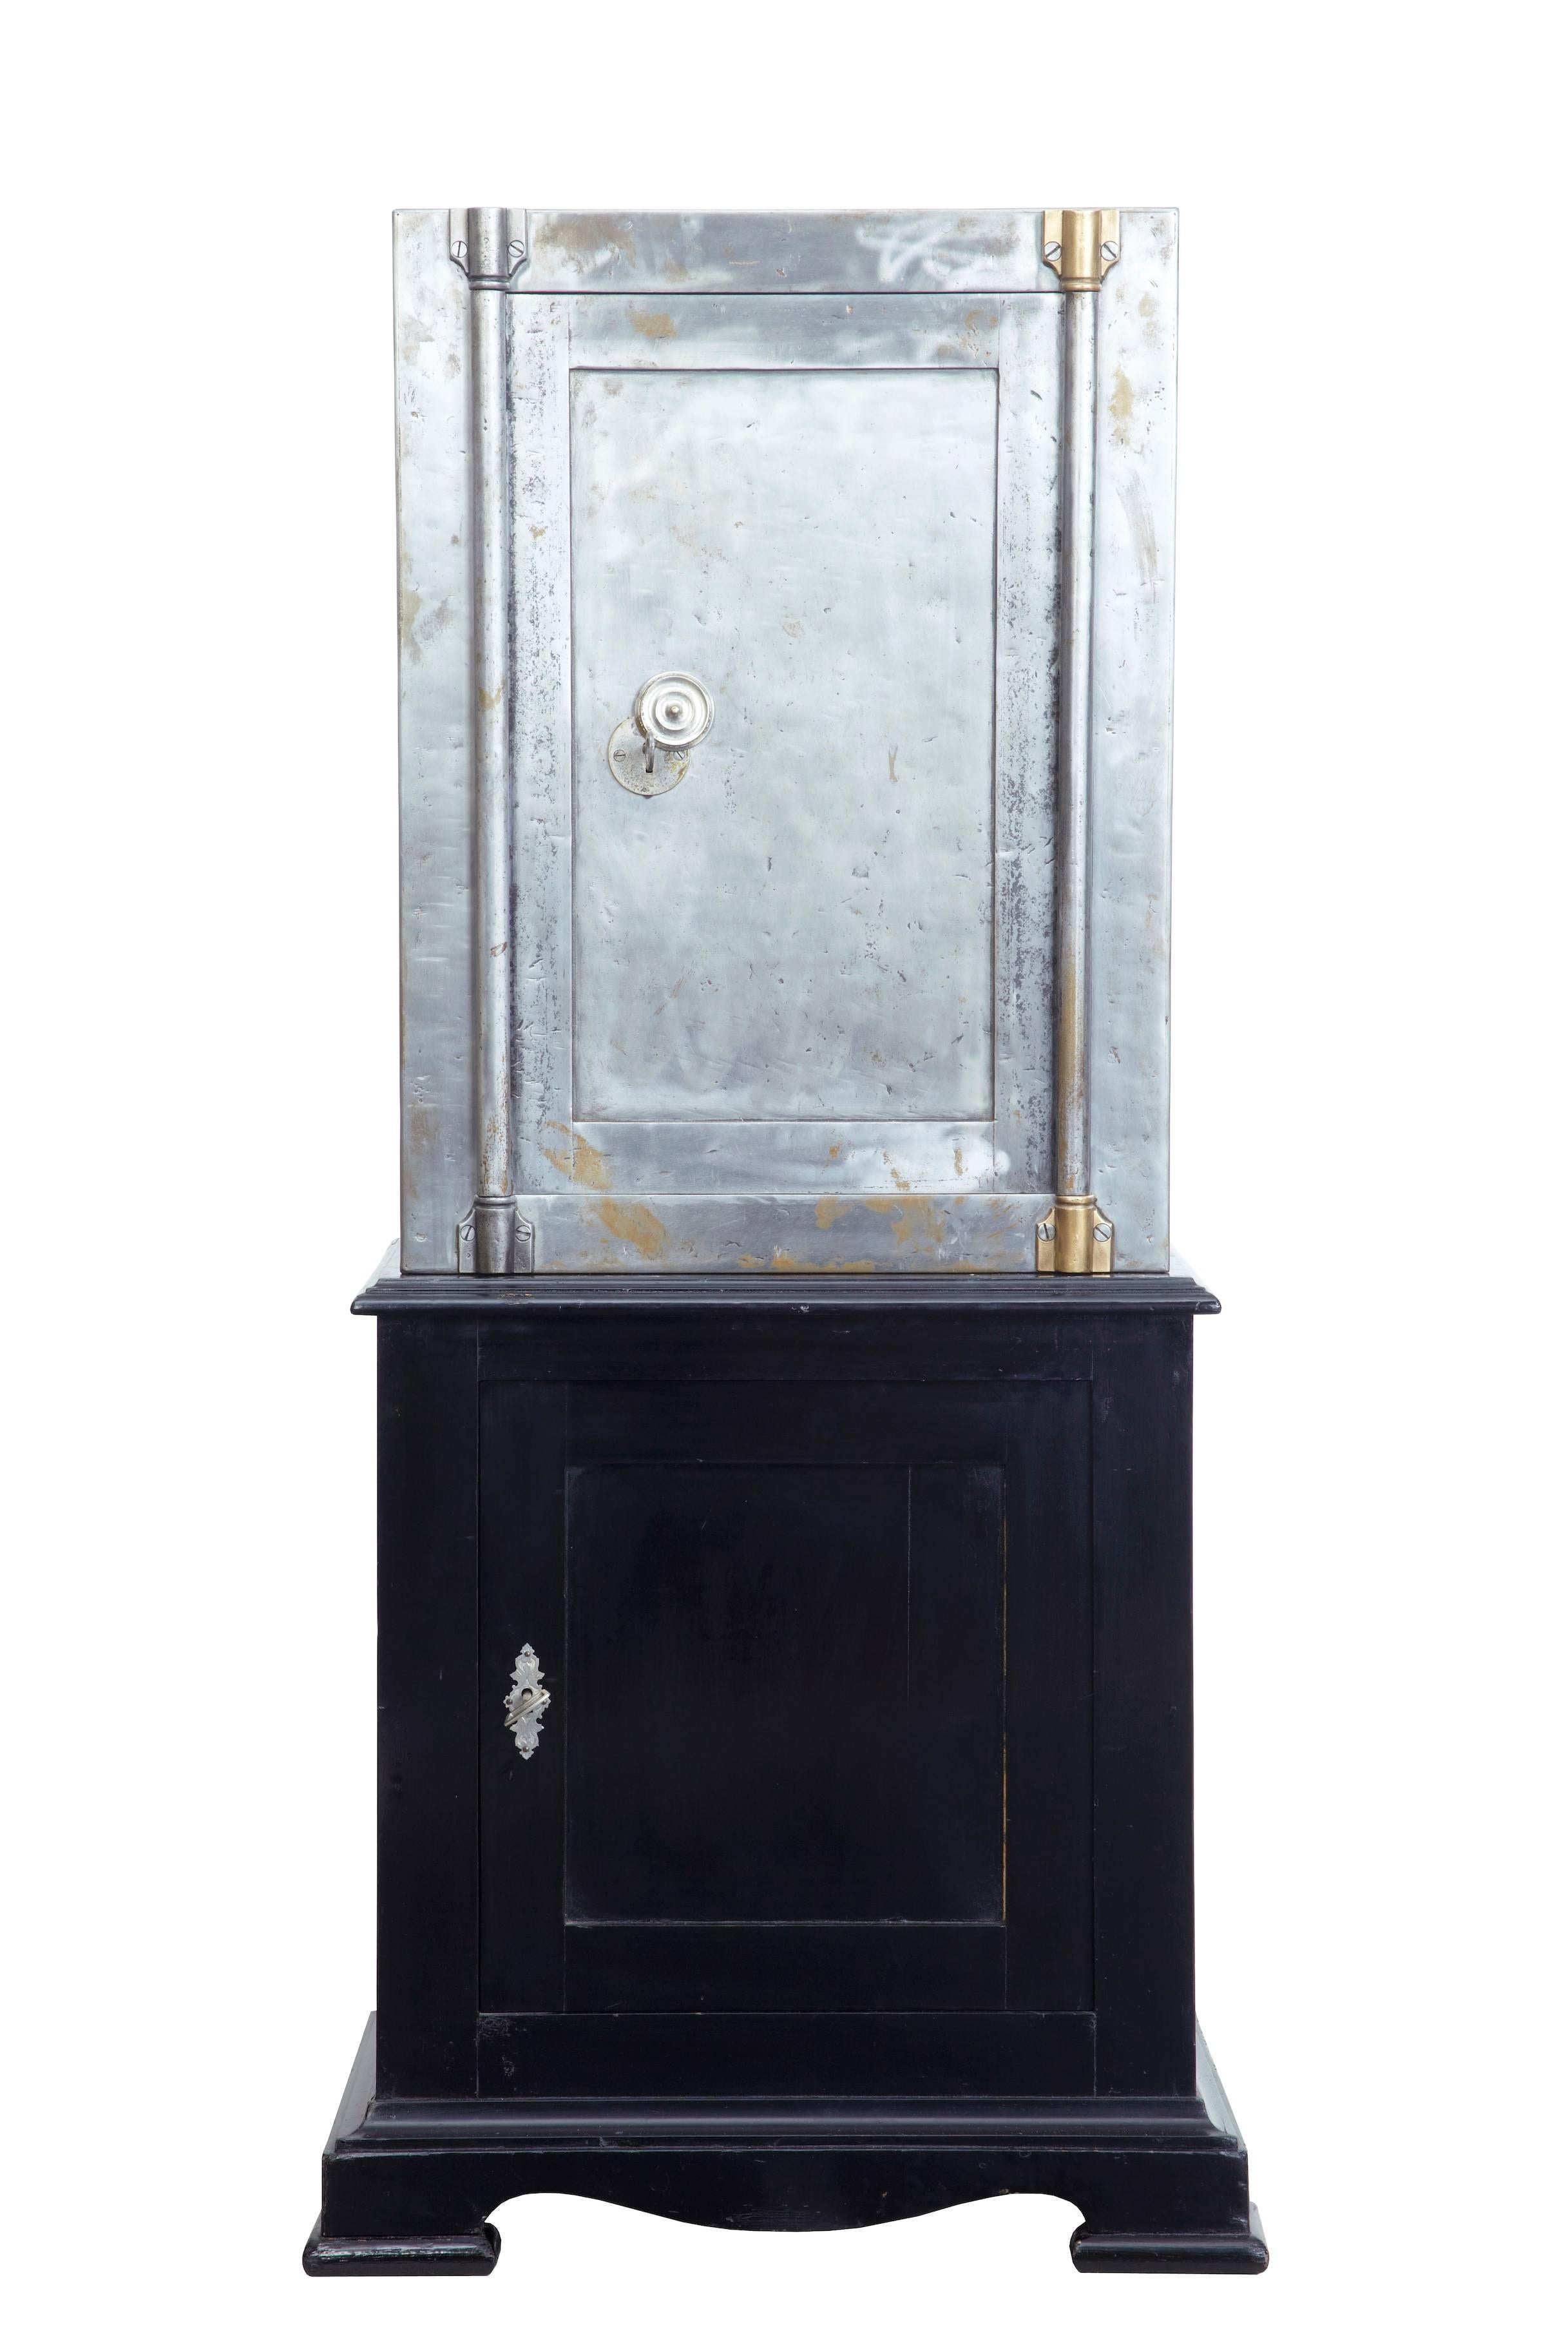 Late Victorian safe on black lacquered cabinet, circa 1890.
Safe has been stripped of paint and polished to show the steel surface.
Original key opens the door to original interior with brass bound fitted lockable drawer.
Stands on pine black